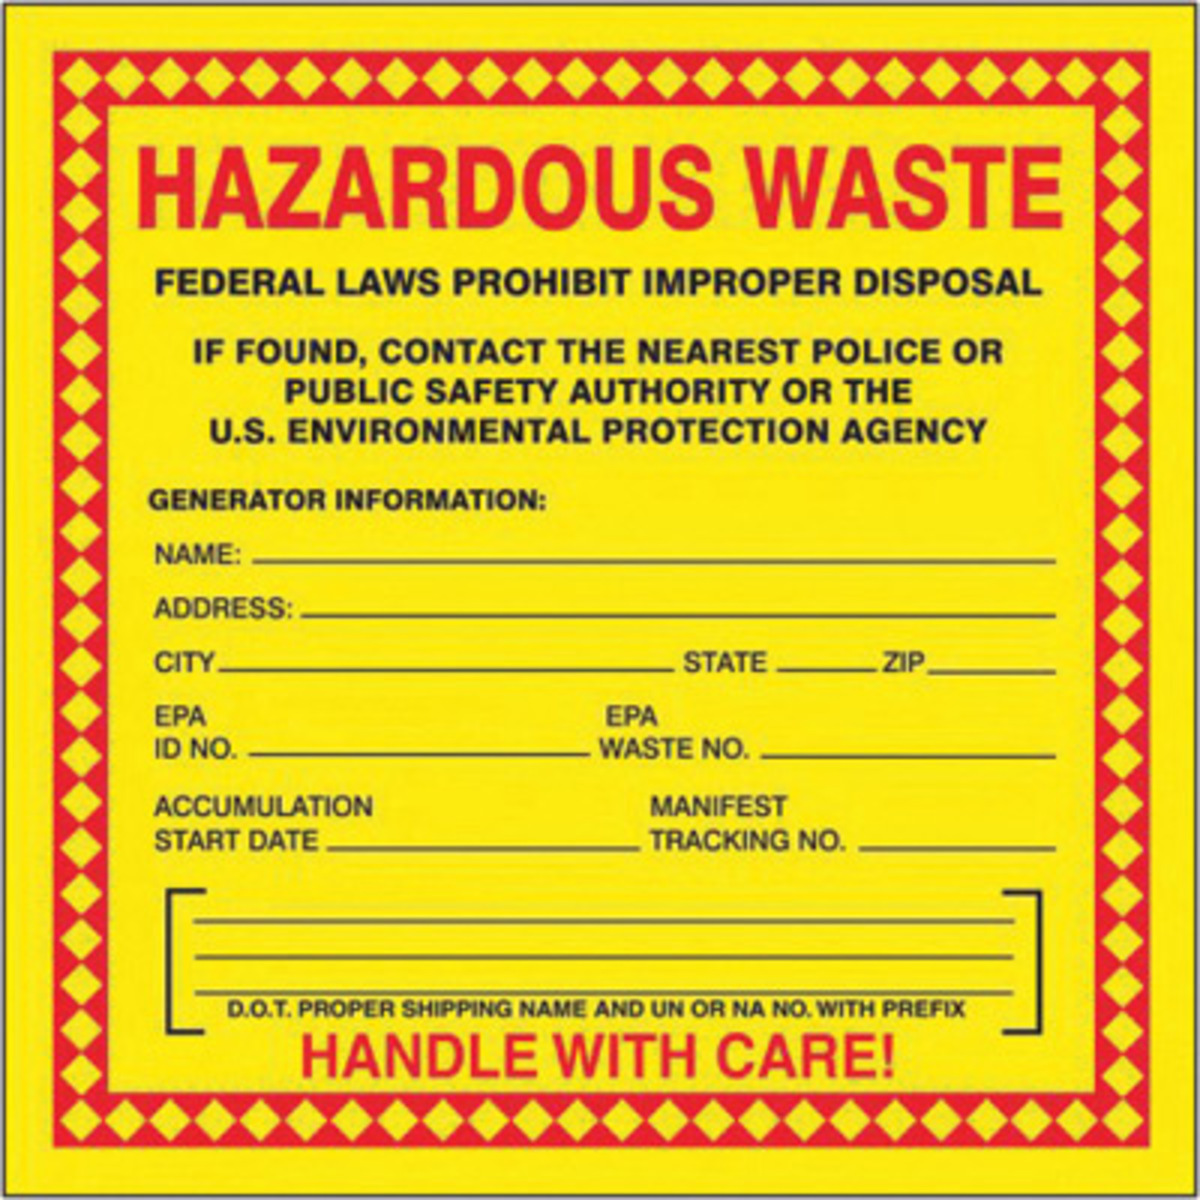 Legend UNIVERSAL WASTE CONTENTS Purple/Black/White ADDRESS CITY,STATE,ZIP Pack of 25 SHIPPER Accuform Signs MHZW17PSP Adhesive Coated Paper Hazardous Waste Label ACCUMULATION START DATE 4 Length x 4 Width 